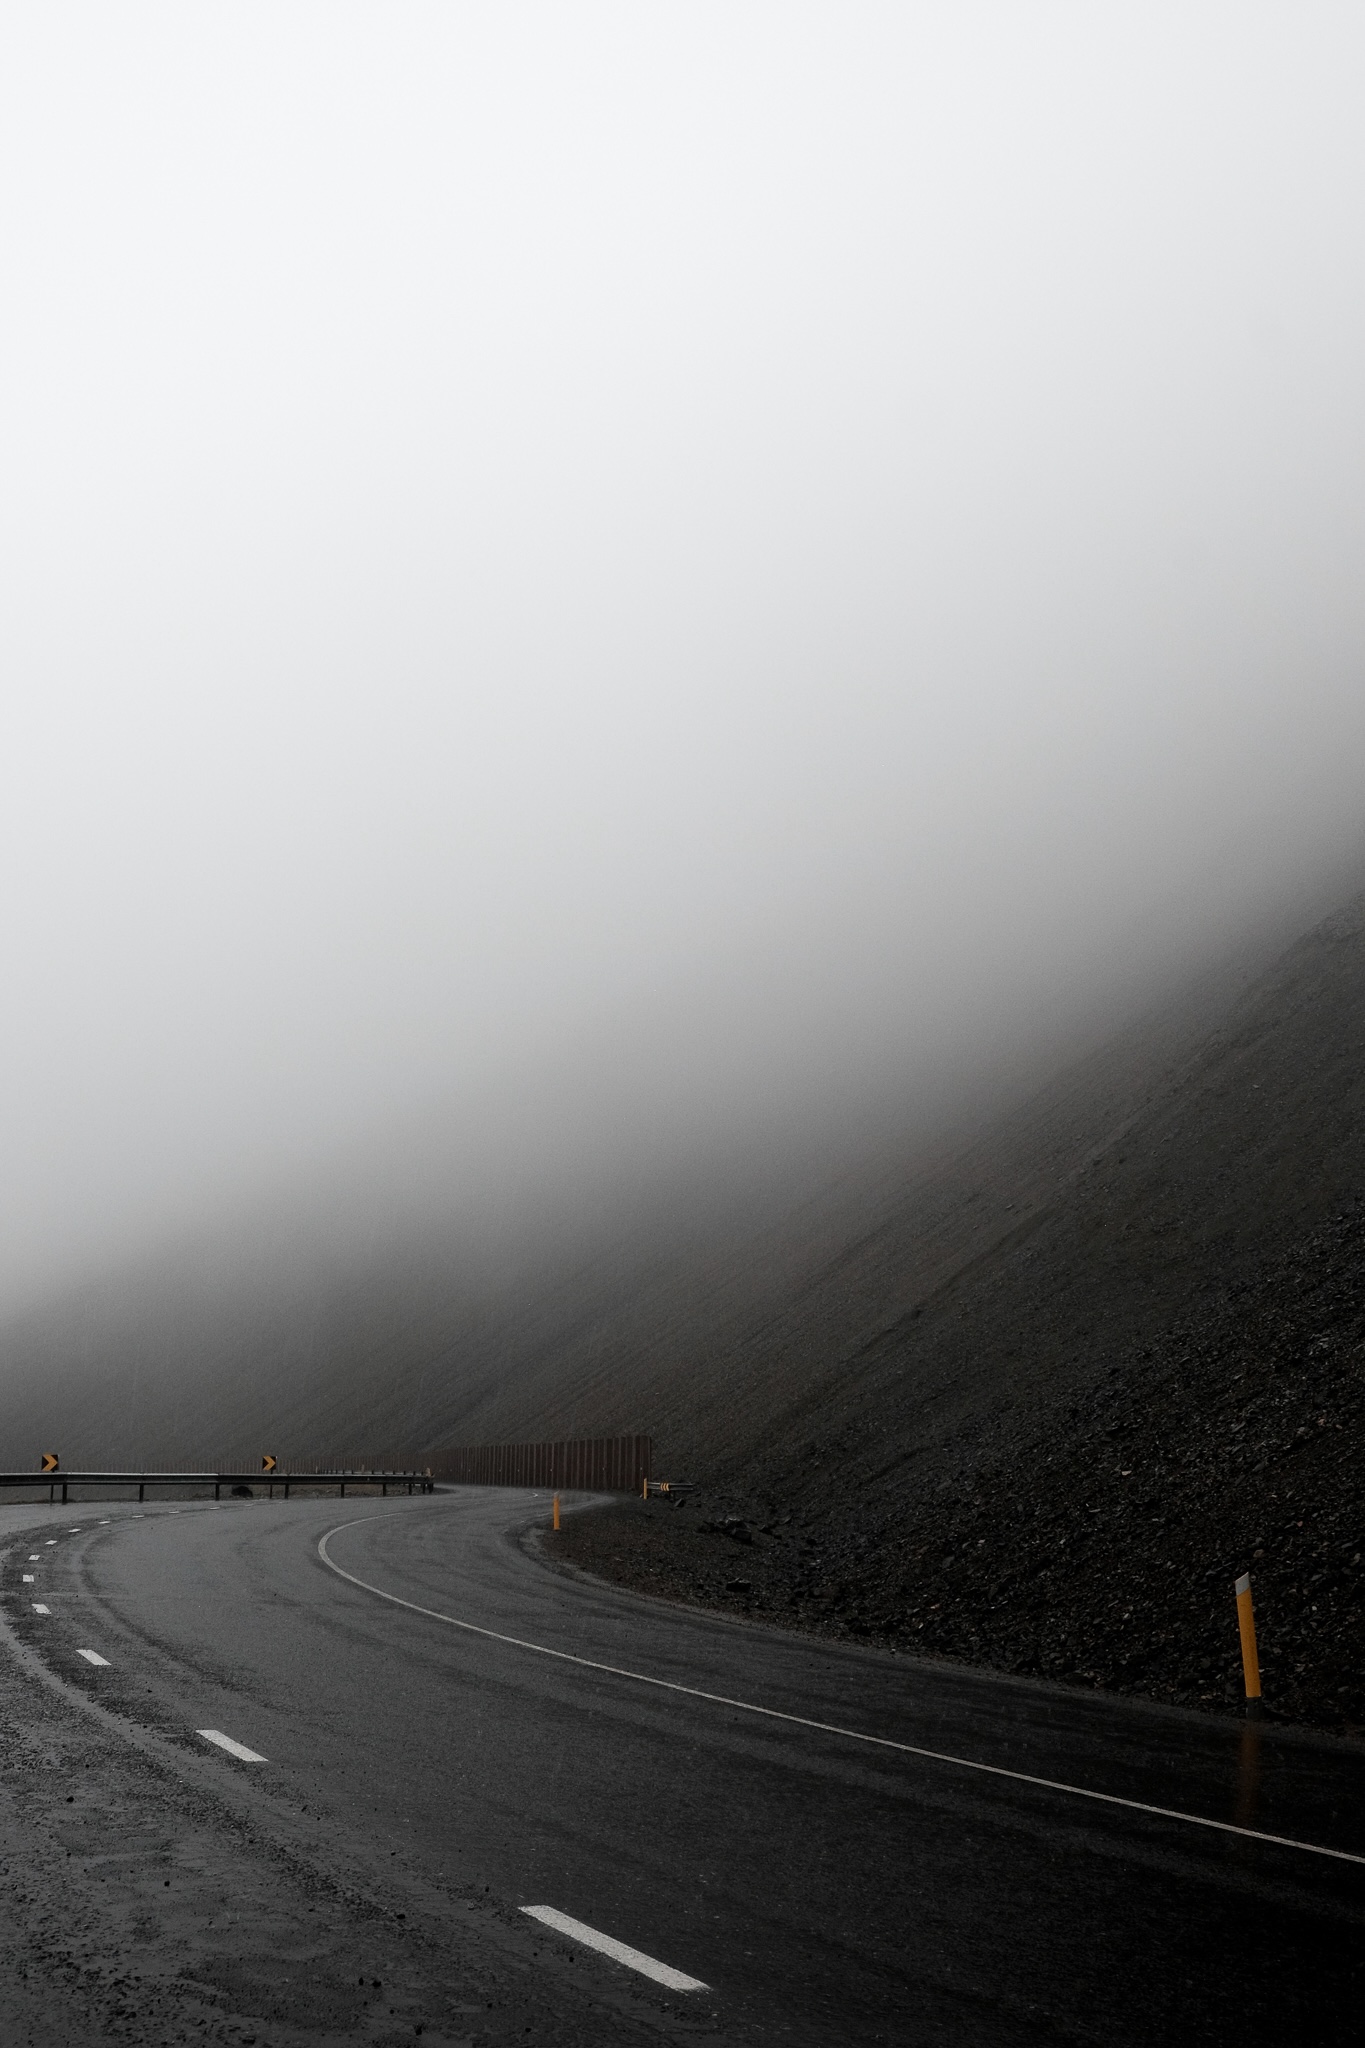 A mountain pass road, raining and covered with mist